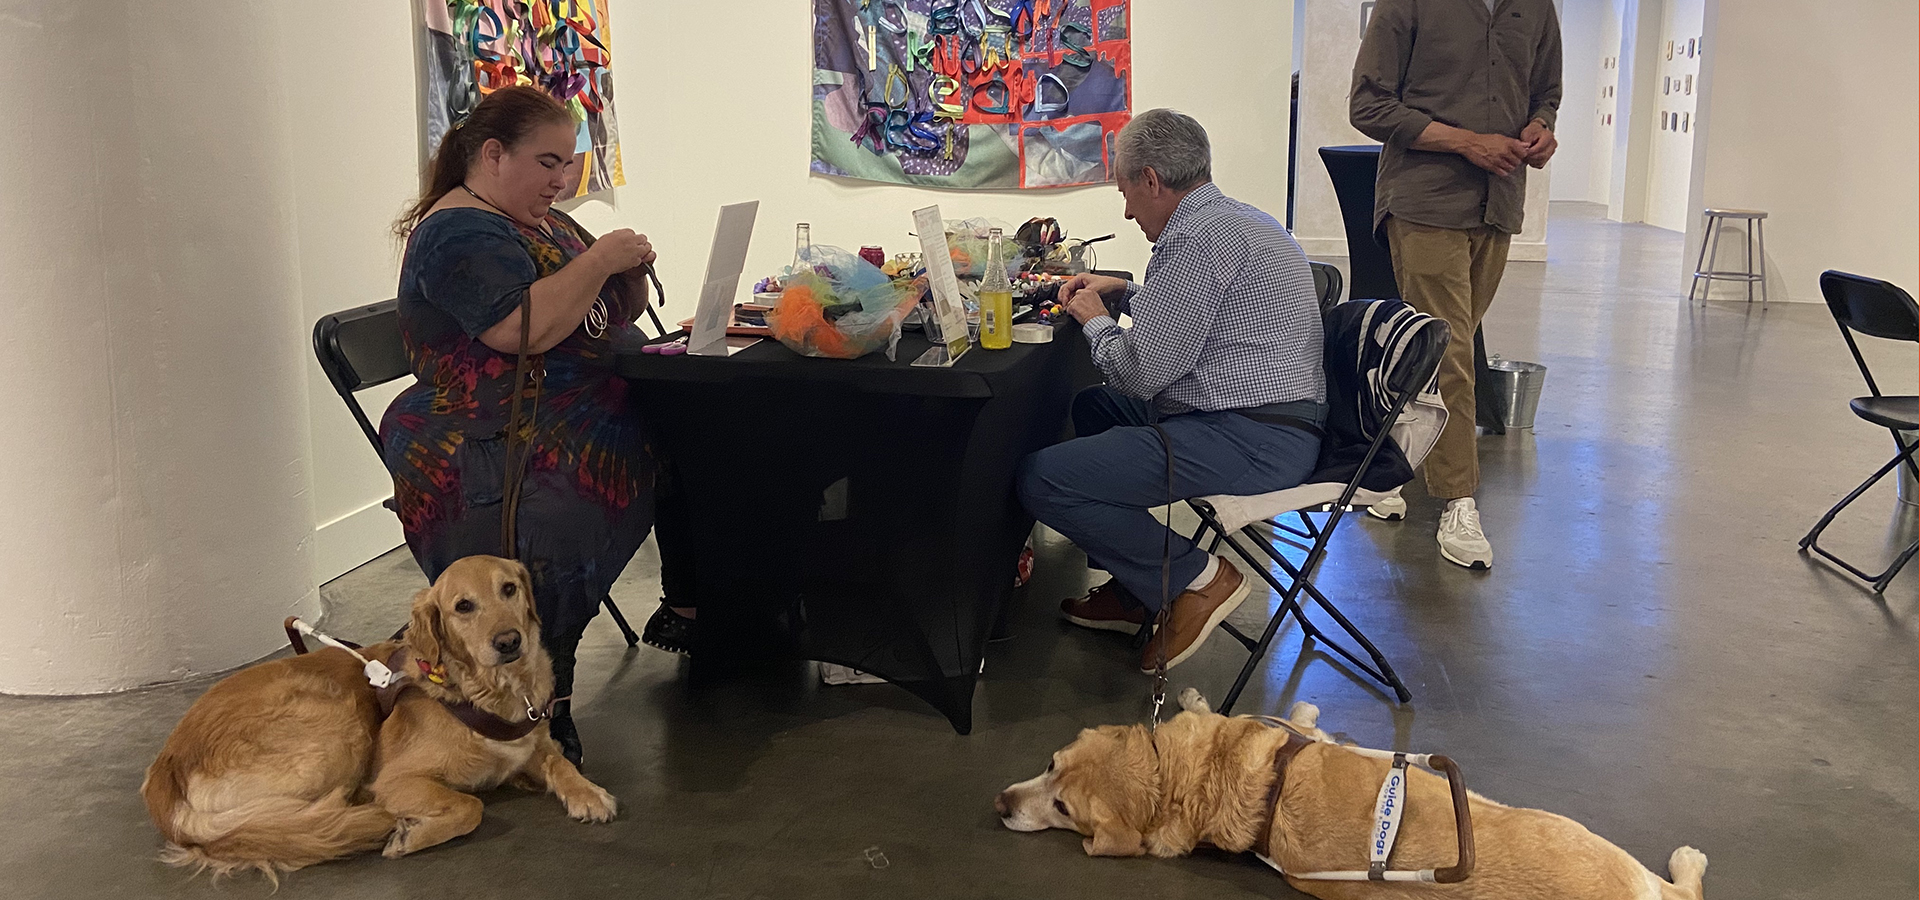 Photo of people sitting at a table crafting and two service dogs sitting near their chairs